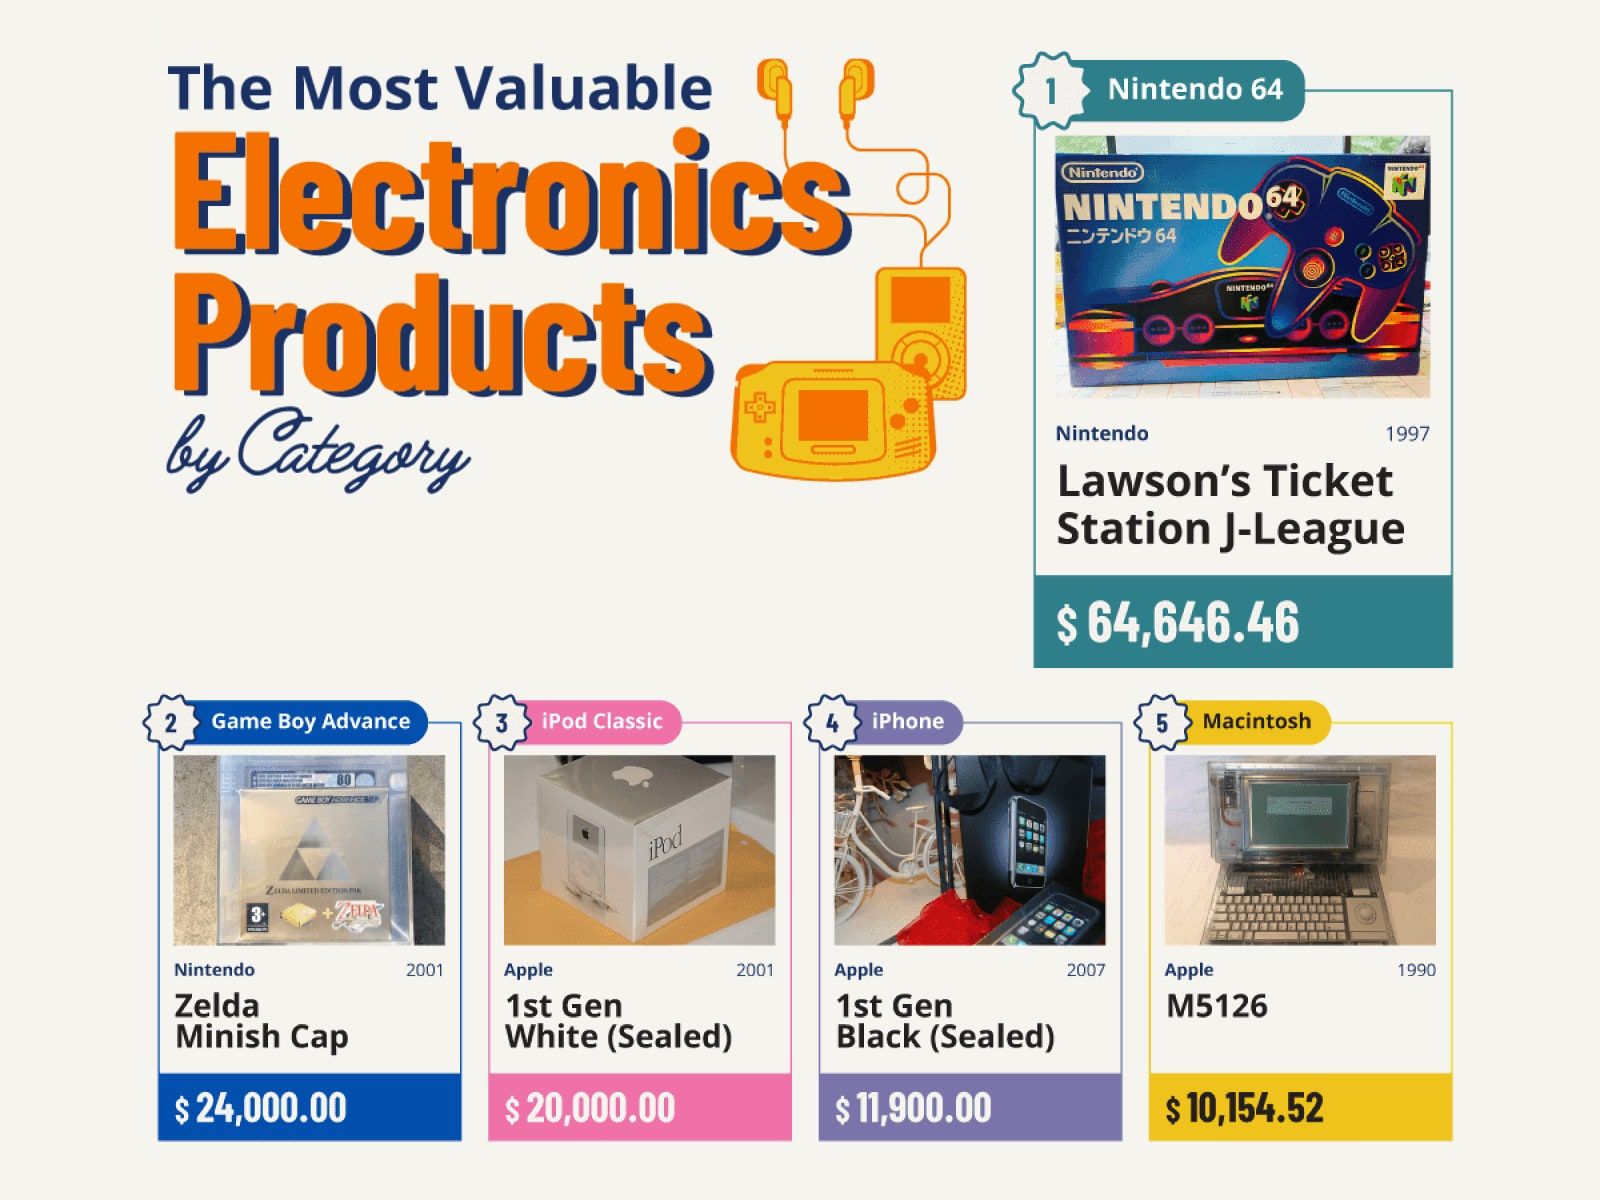 Nintendo and Apple dominate the list of the 10 most expensive vintage gadgets